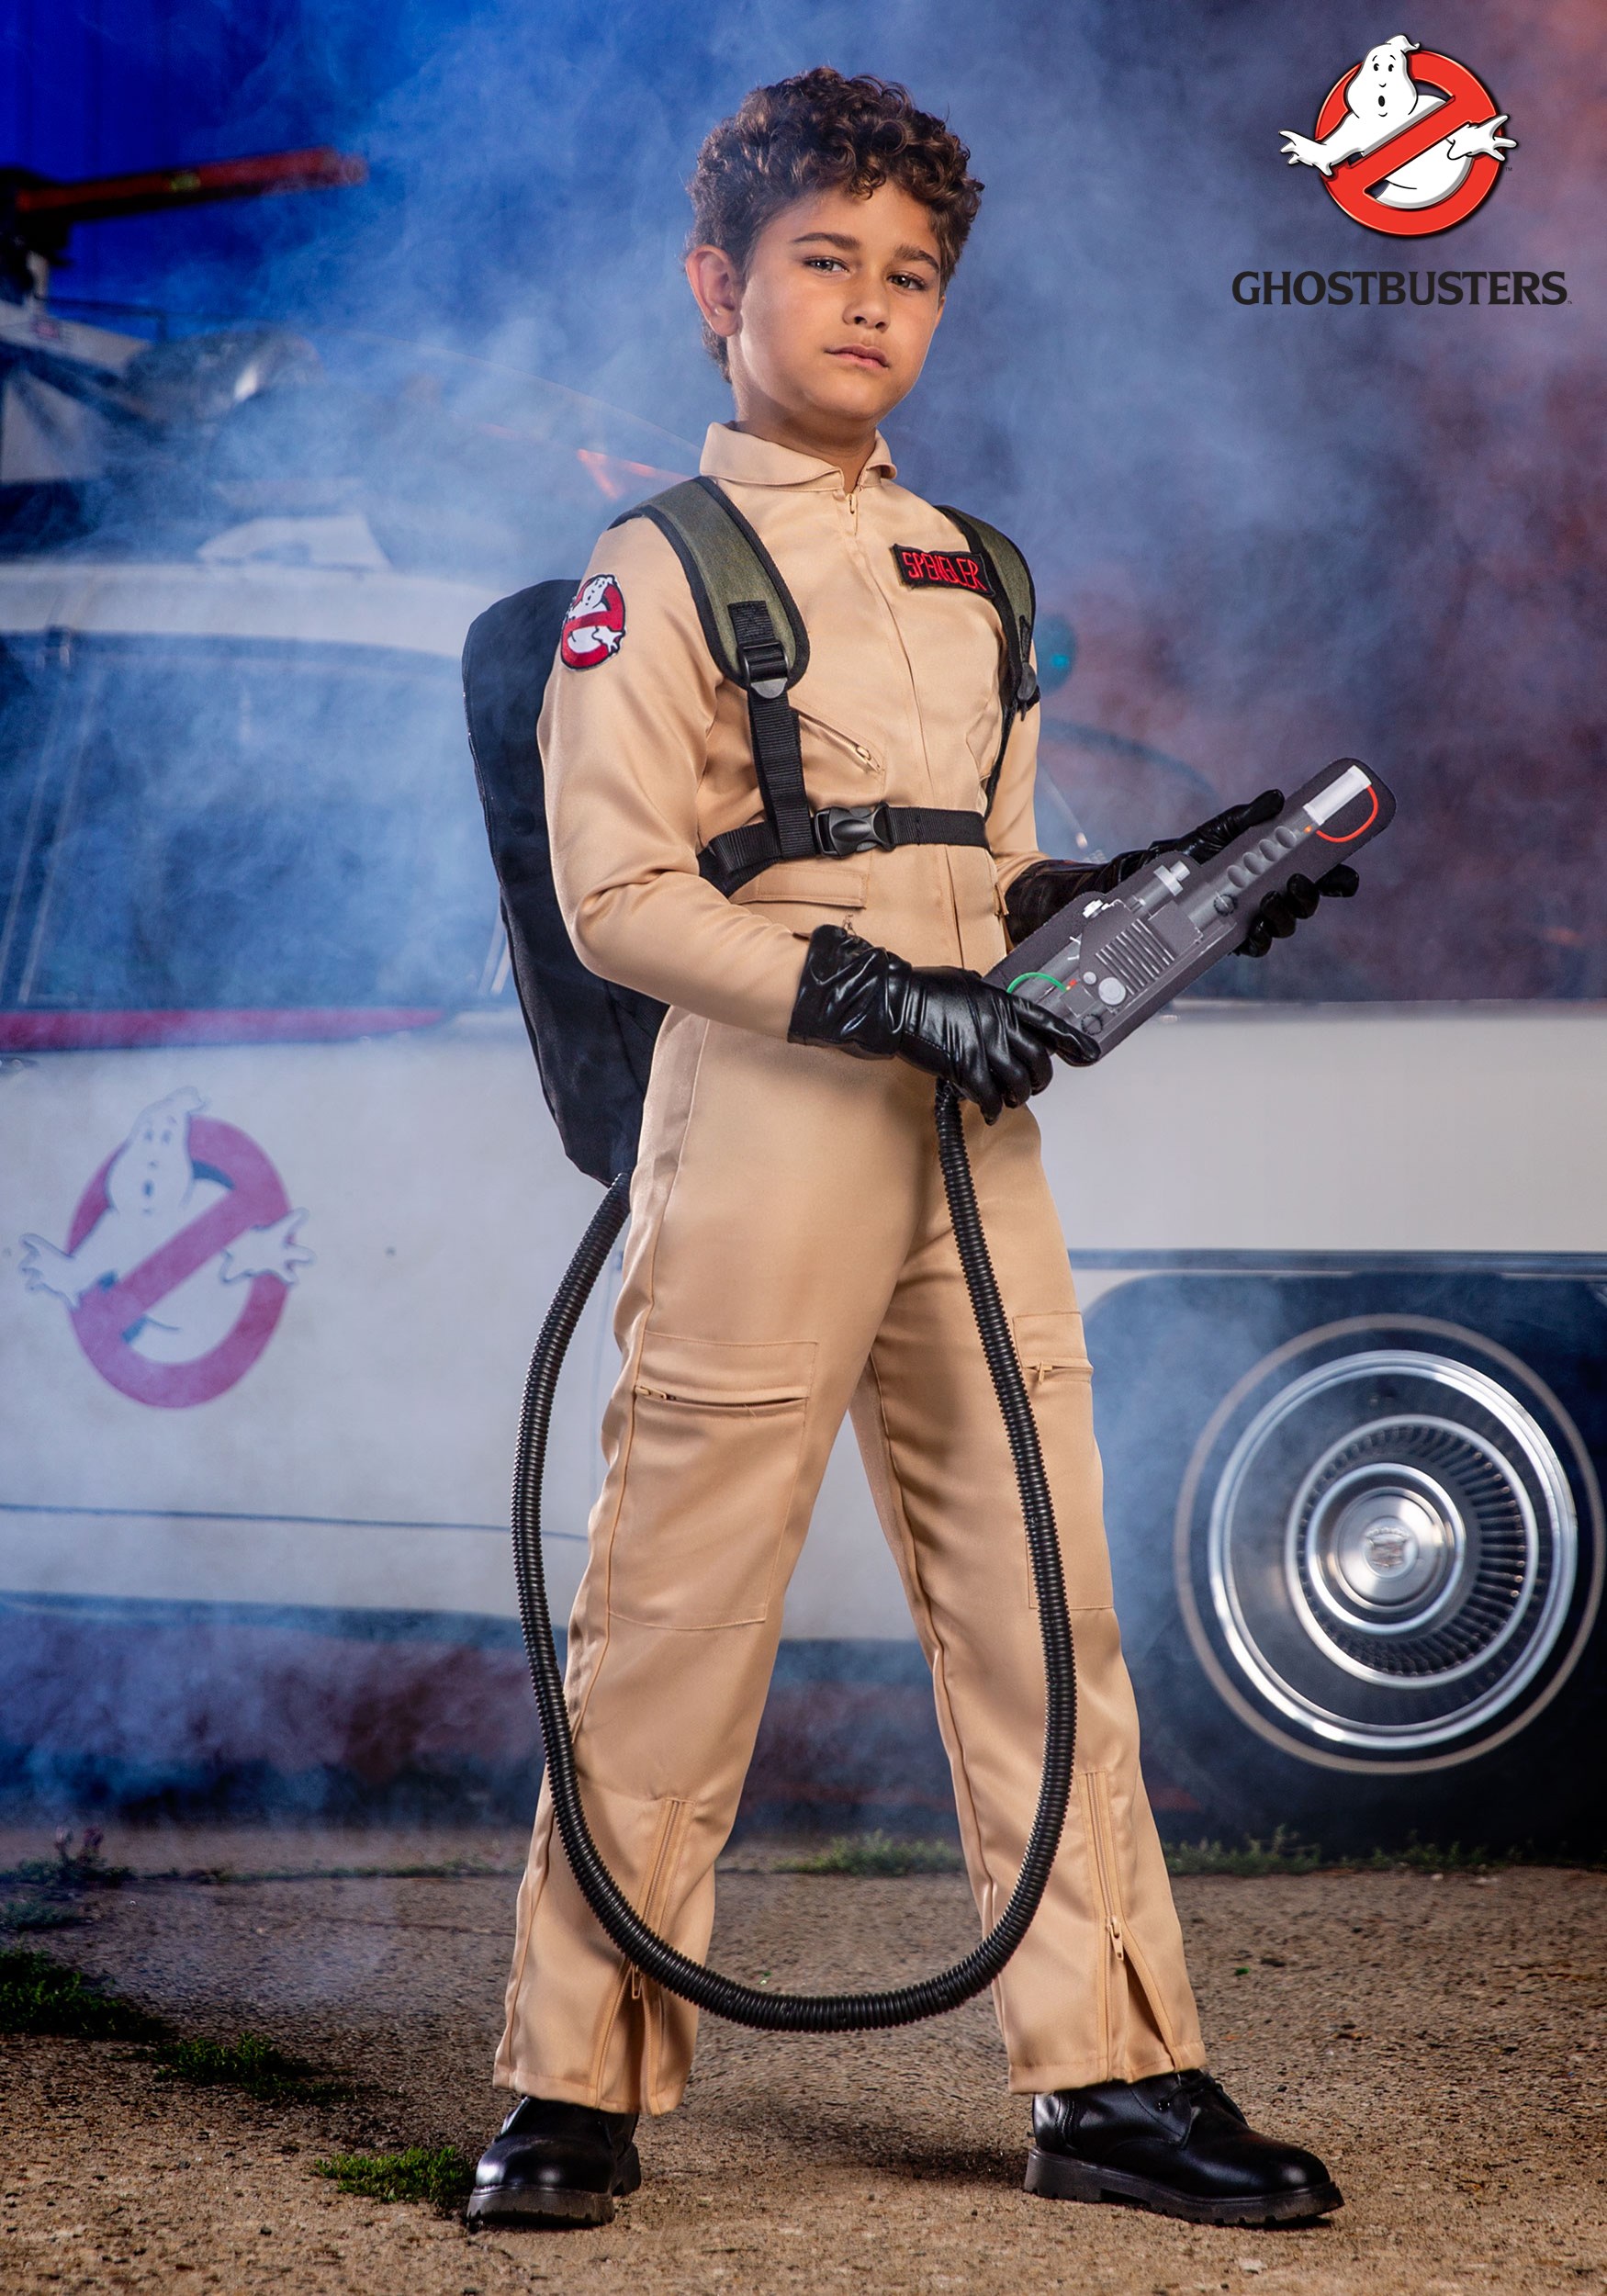 Womens Ghostbusters Costume Official Licensed Halloween Adult Fancy Dress 8-22